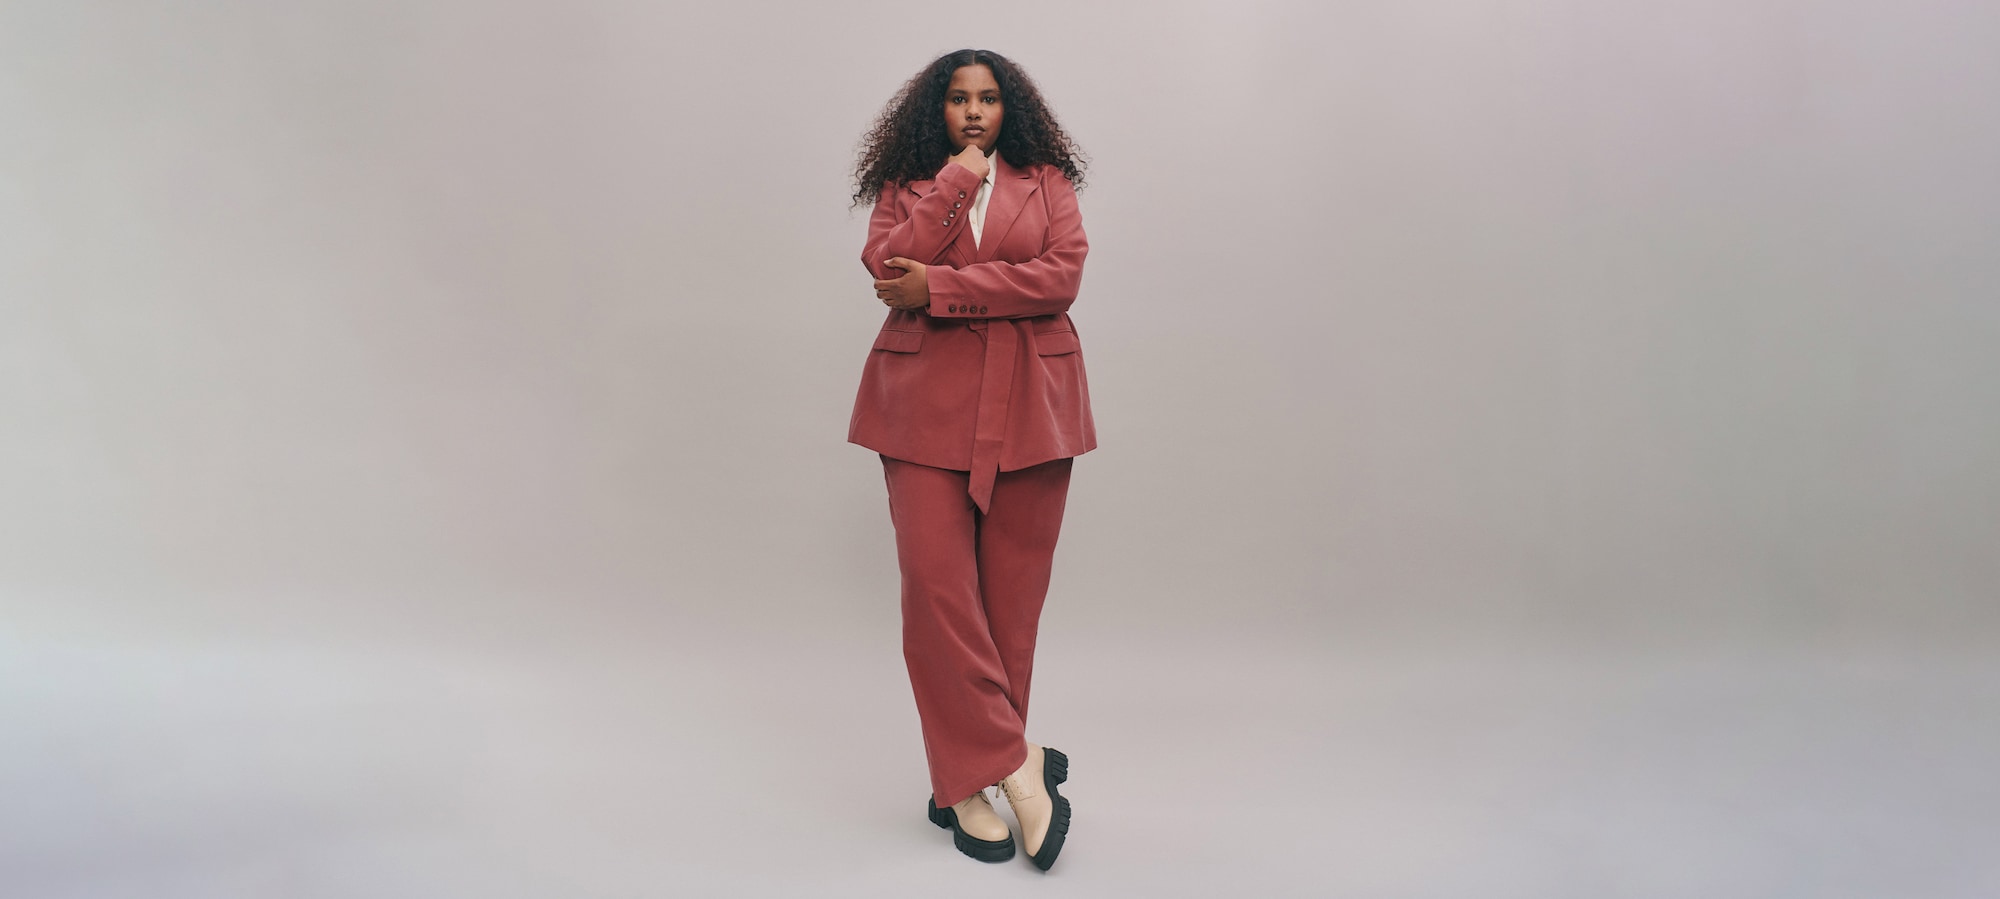 Anything but ordinary Back-to-office looks for curvy women